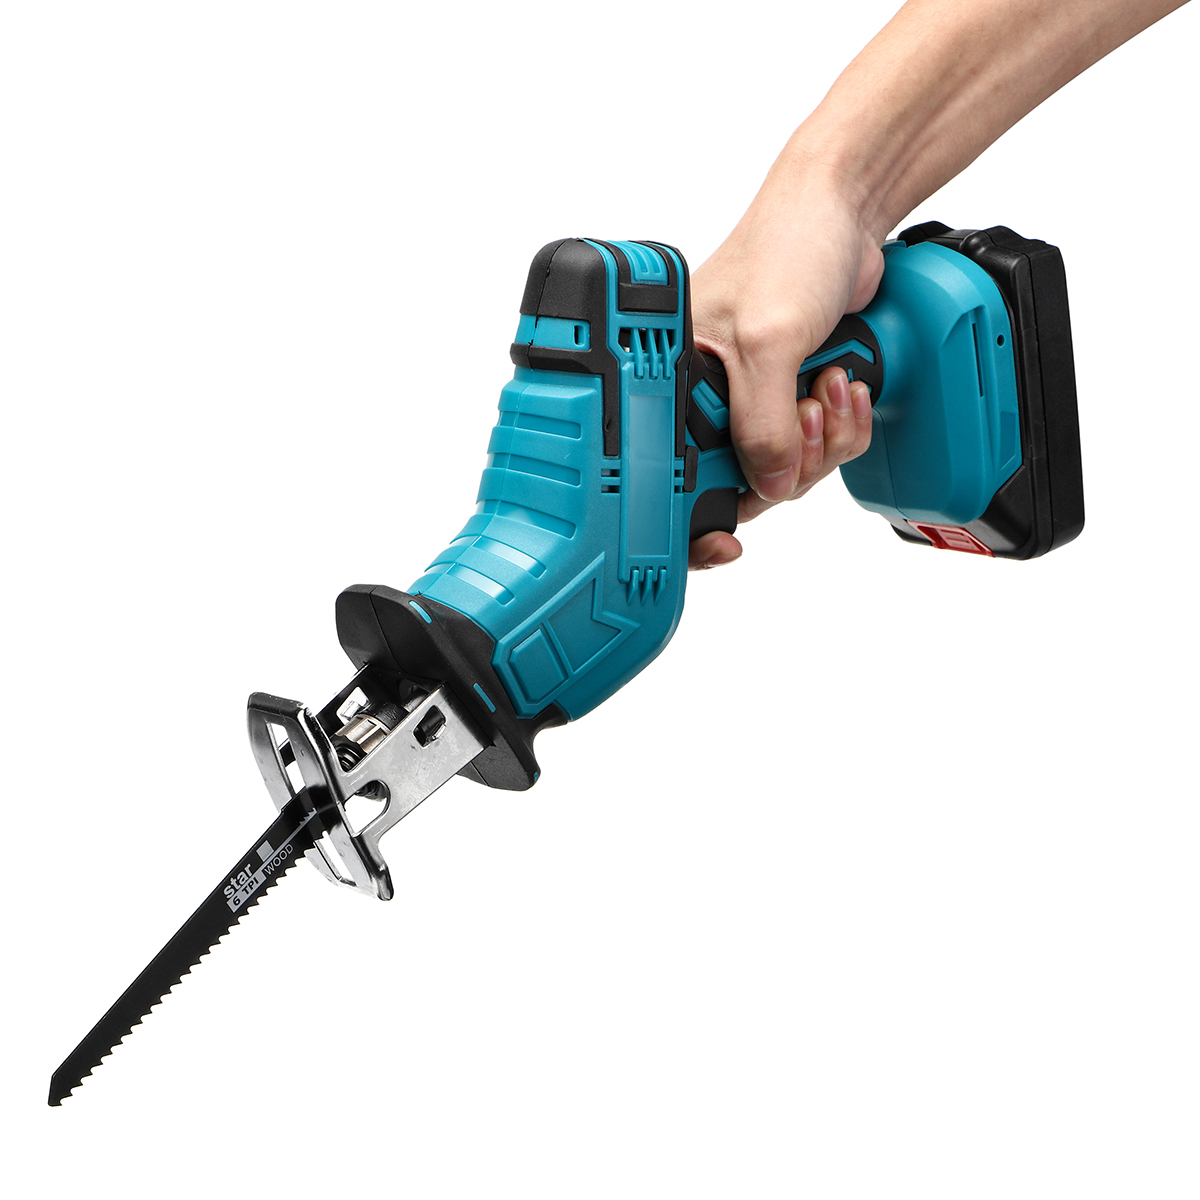 21V-Cordless-Reciprocating-Saw-Electric-Sabre-Saw-Woodworking-Wood-Metal-Cutting-Tool-1762480-4